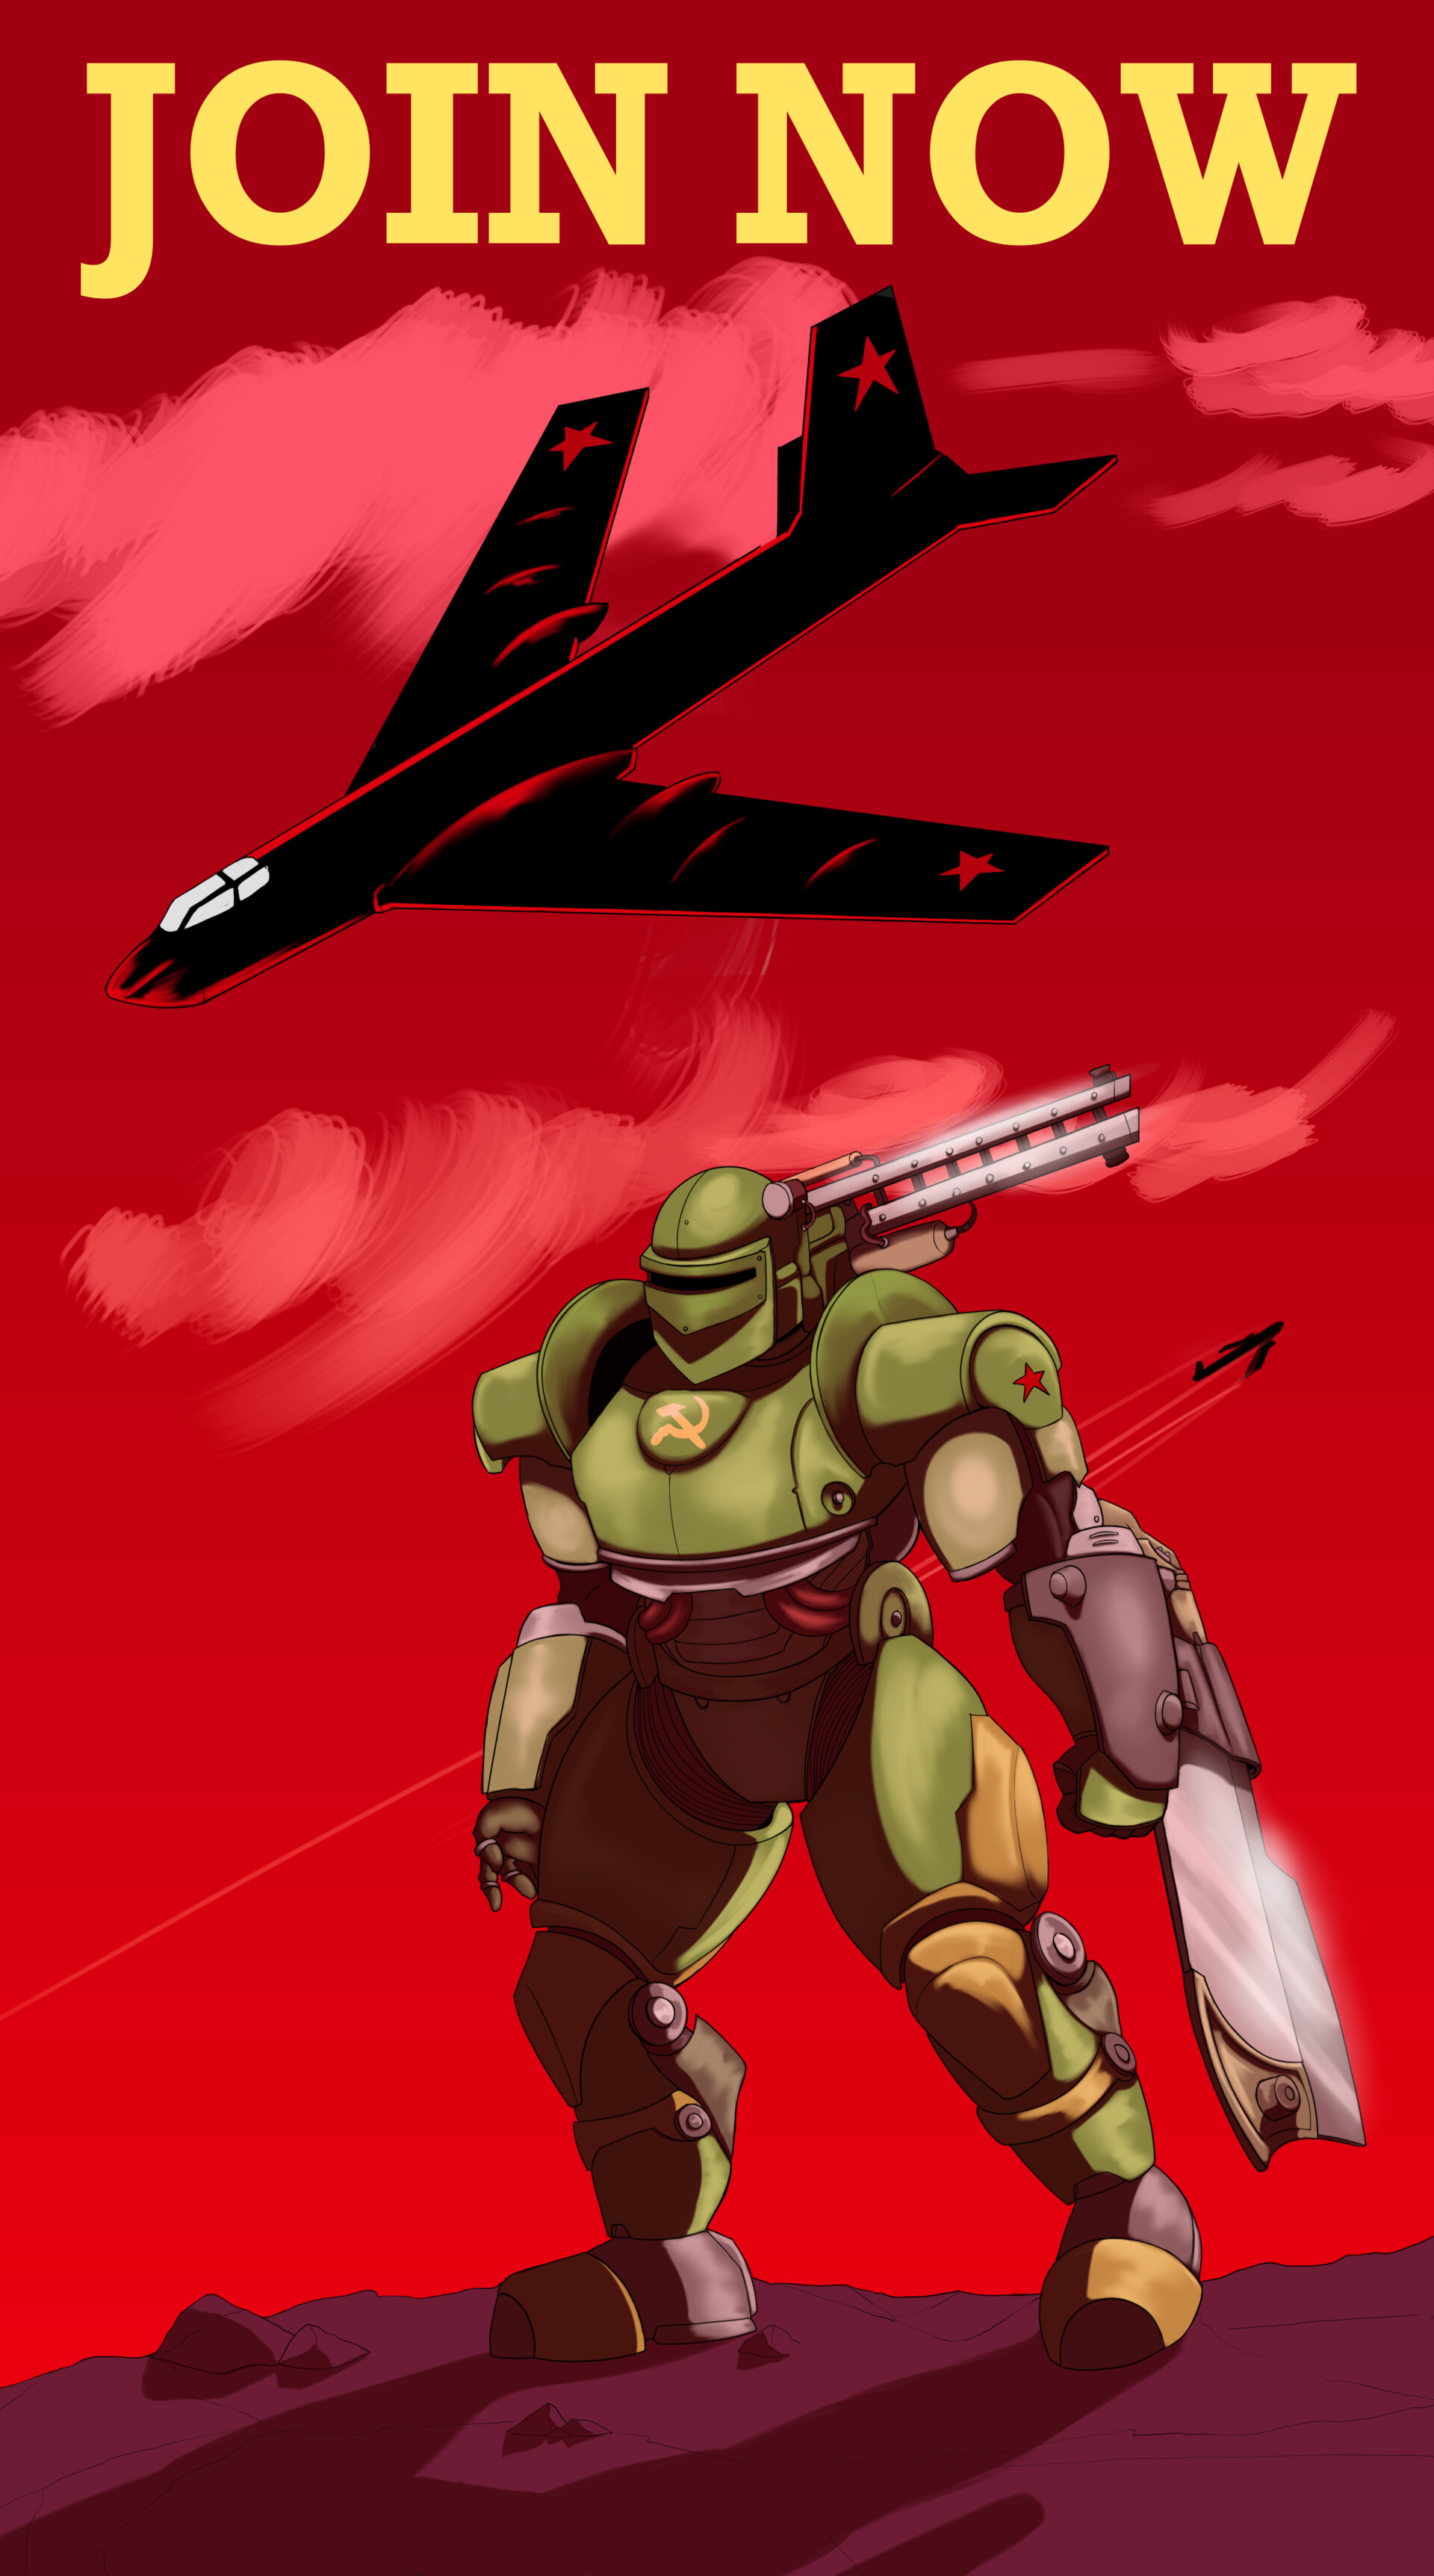 DAY OF WRATH, fan project by u/infinitypilot, art and design of Doomslayer  skins by me! Enjoy : r/Doom